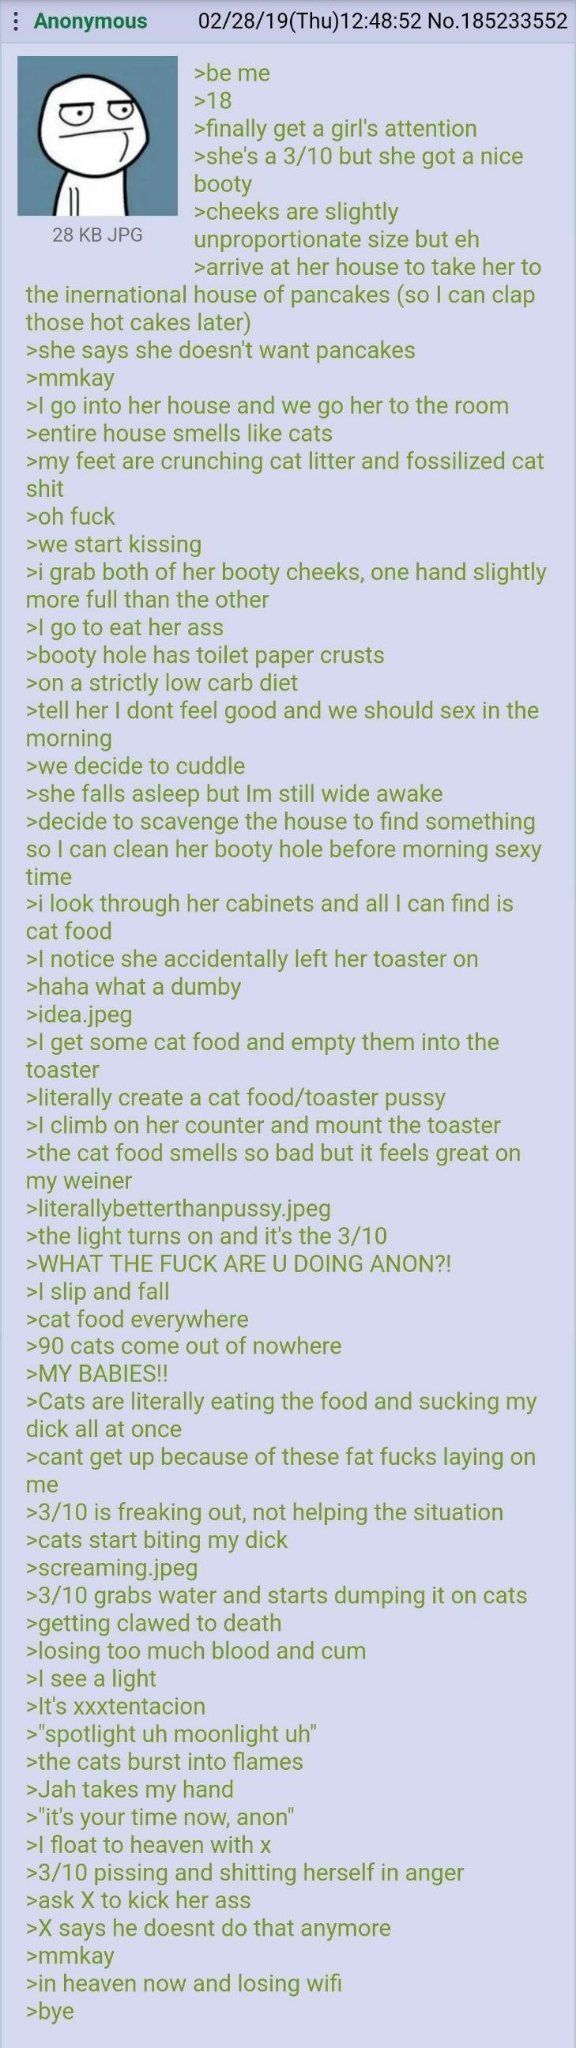 Anon has a date